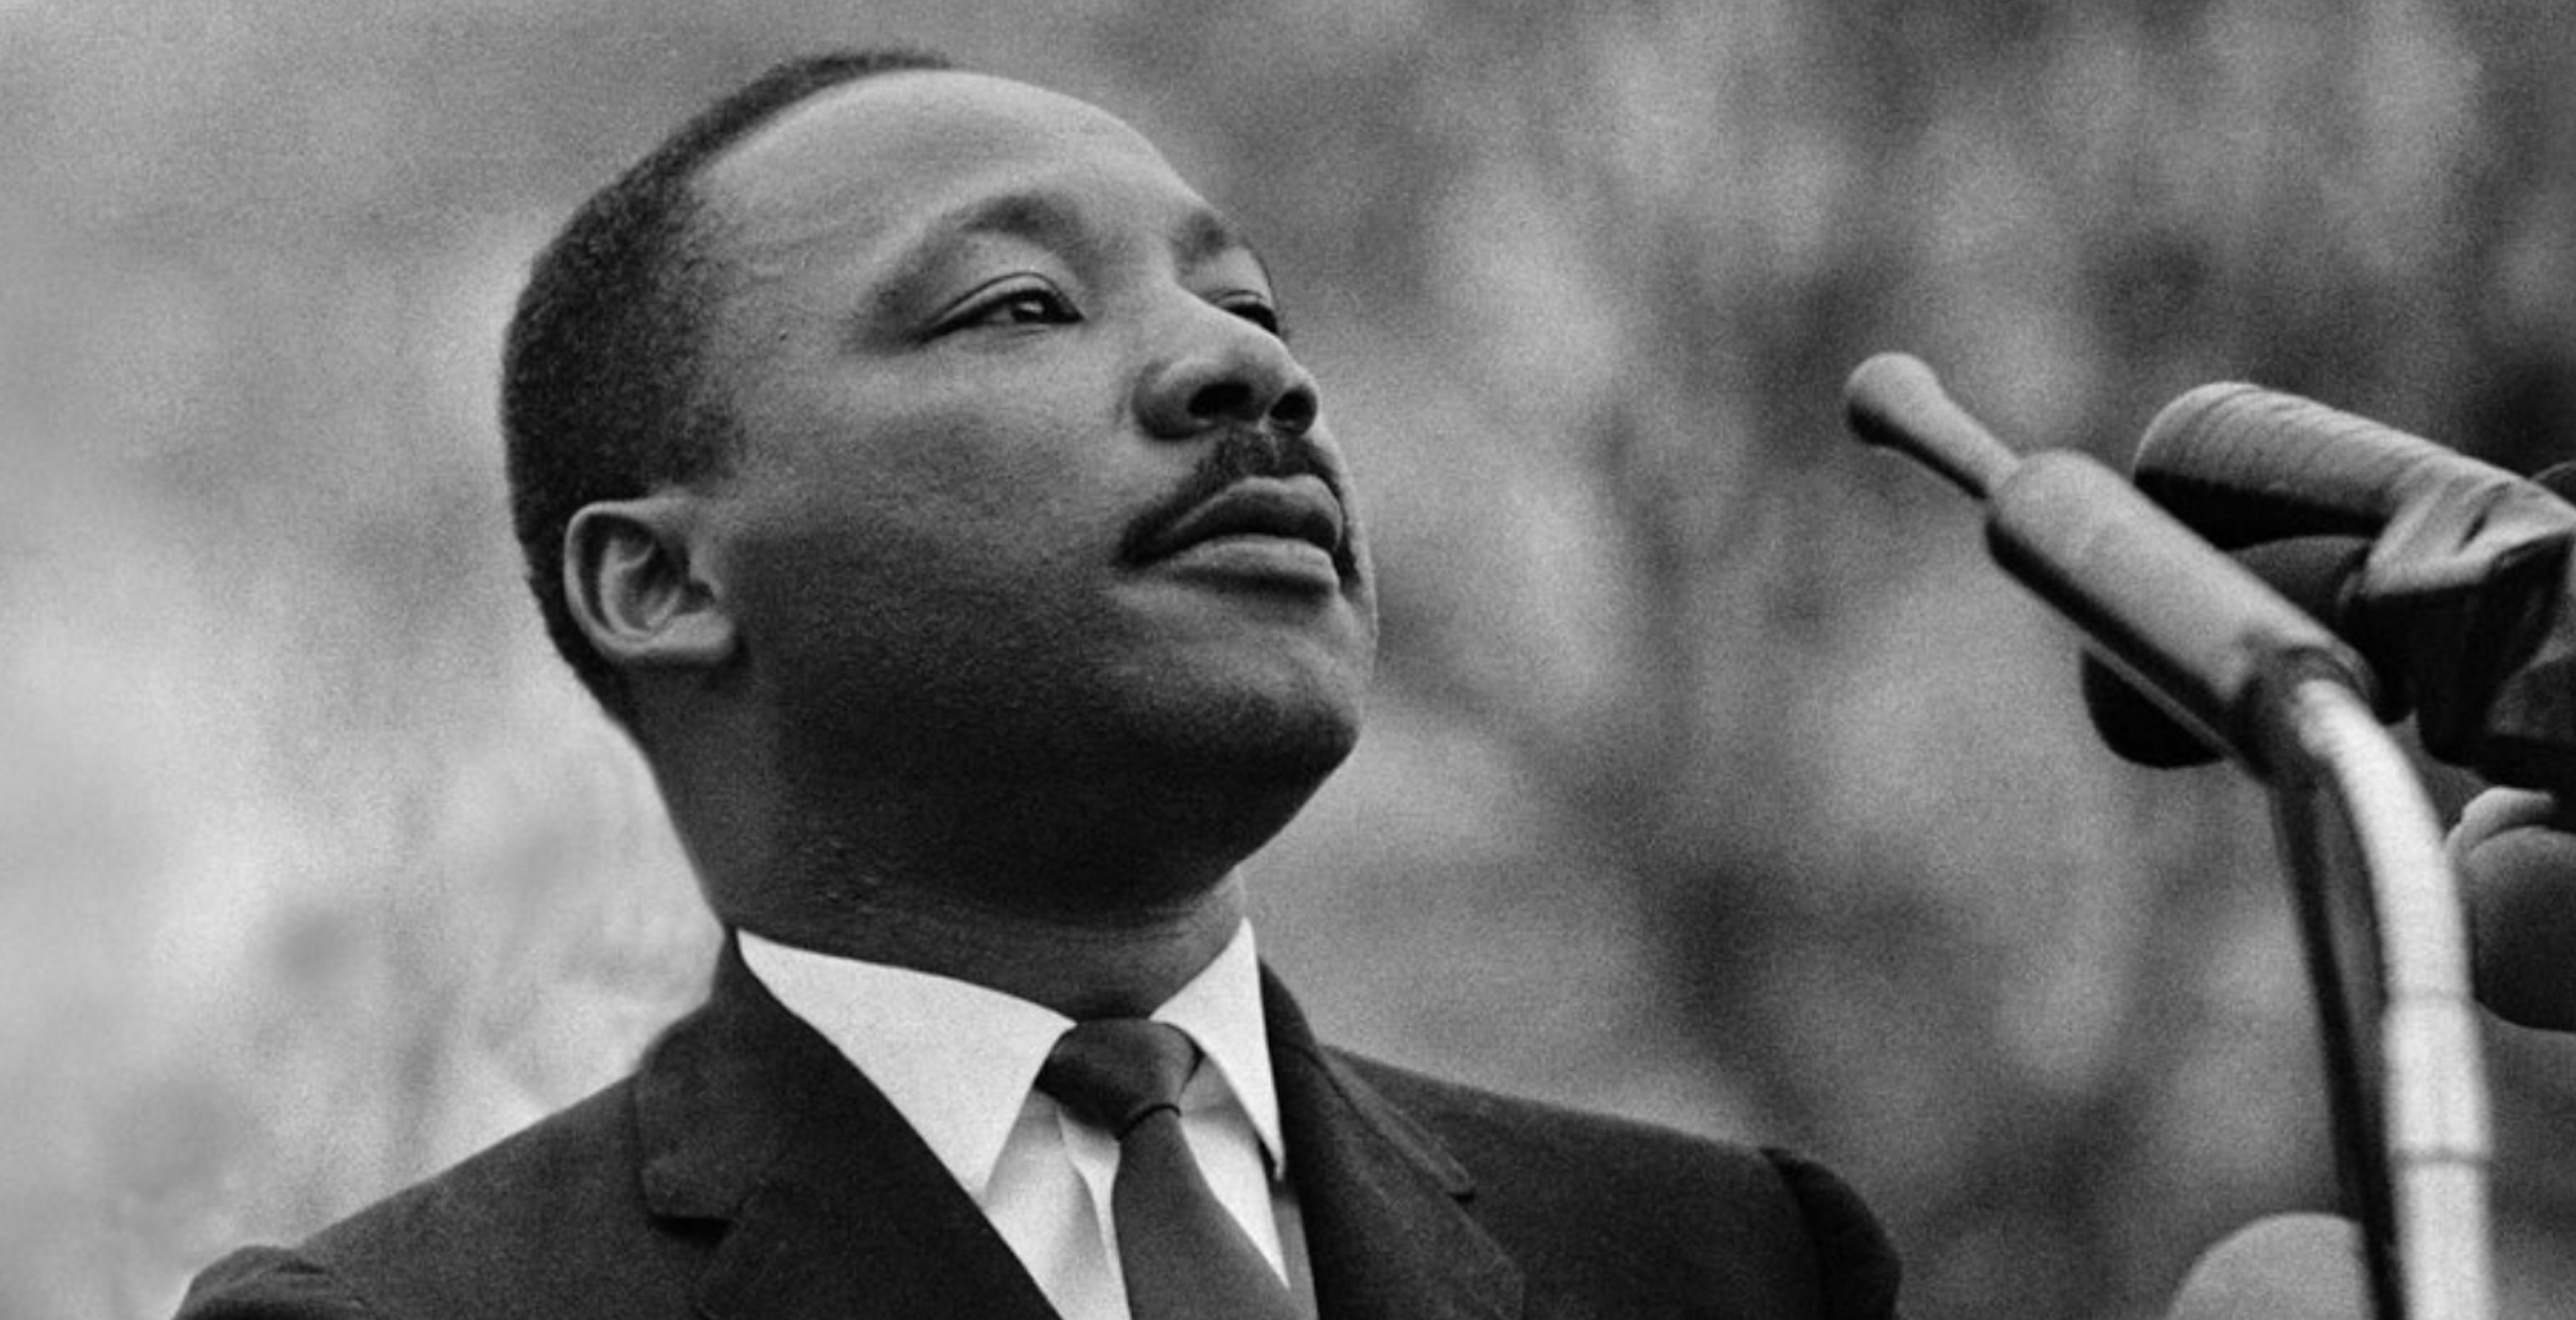 essays about martin luther king jr